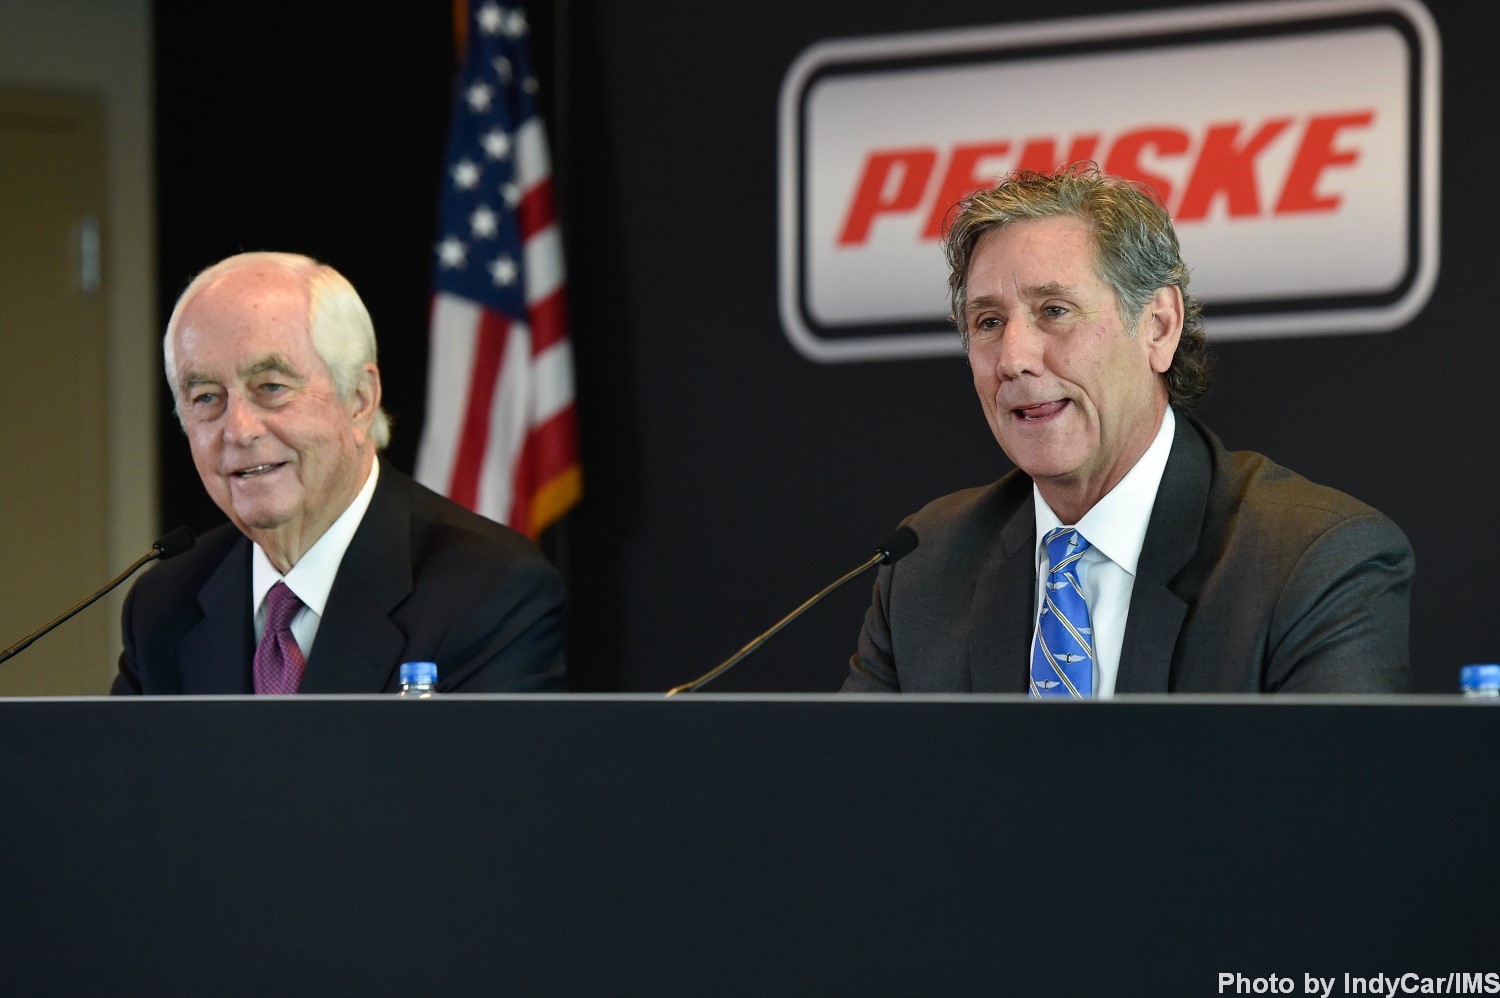 Does Penske understand how to make the drivers household names?